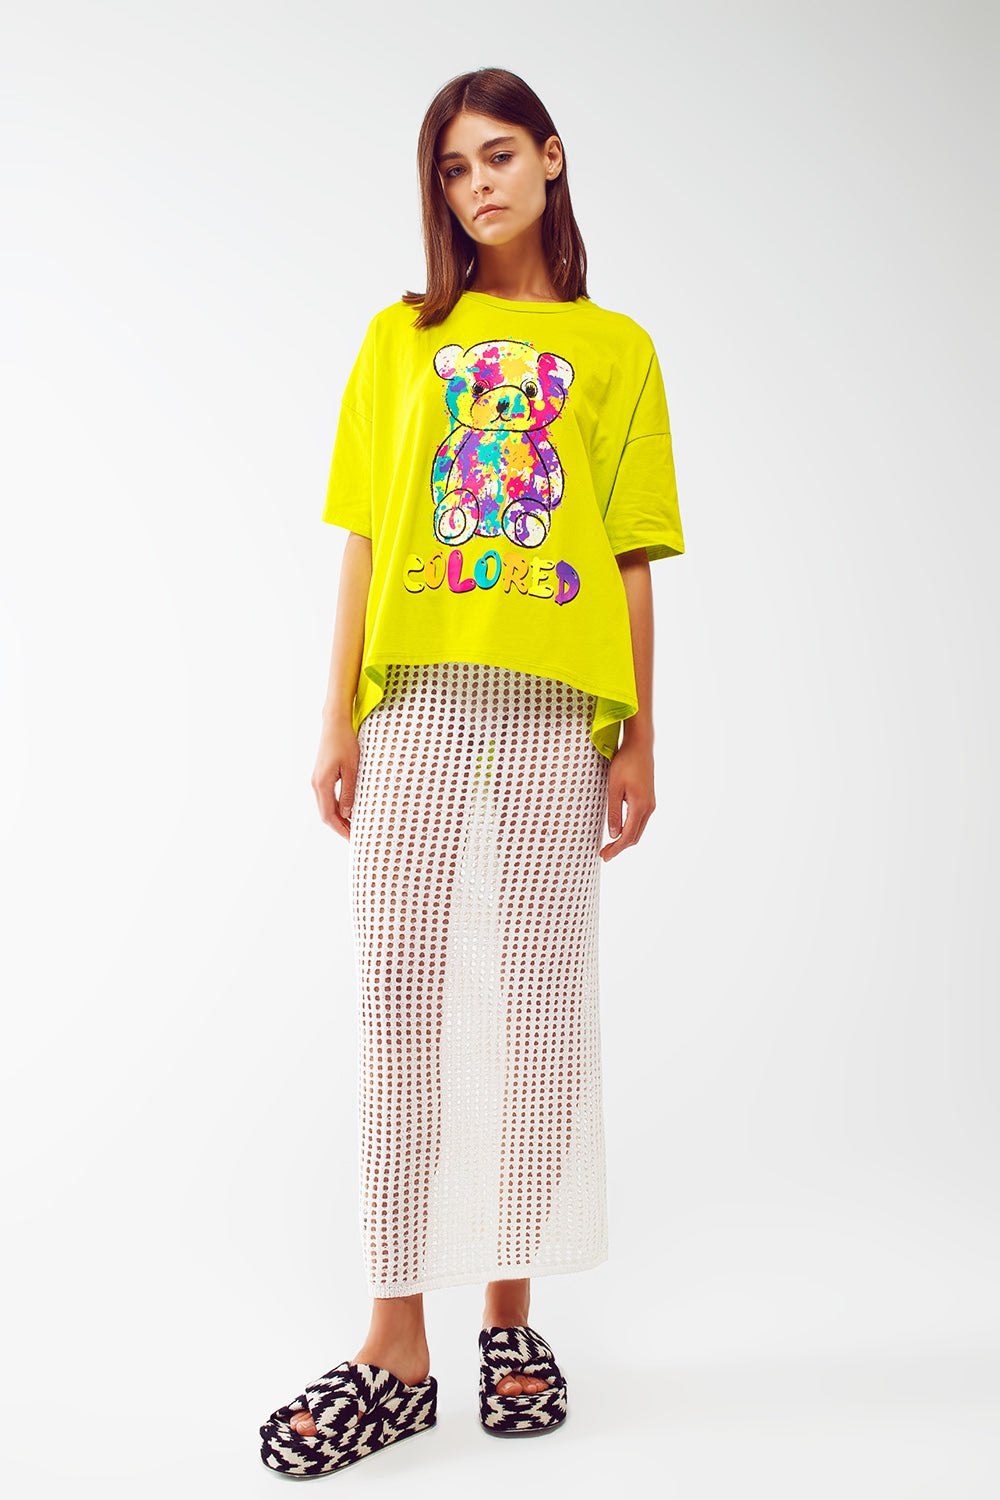 Loose-fitting lime T-shirt with colored bear - Szua Store